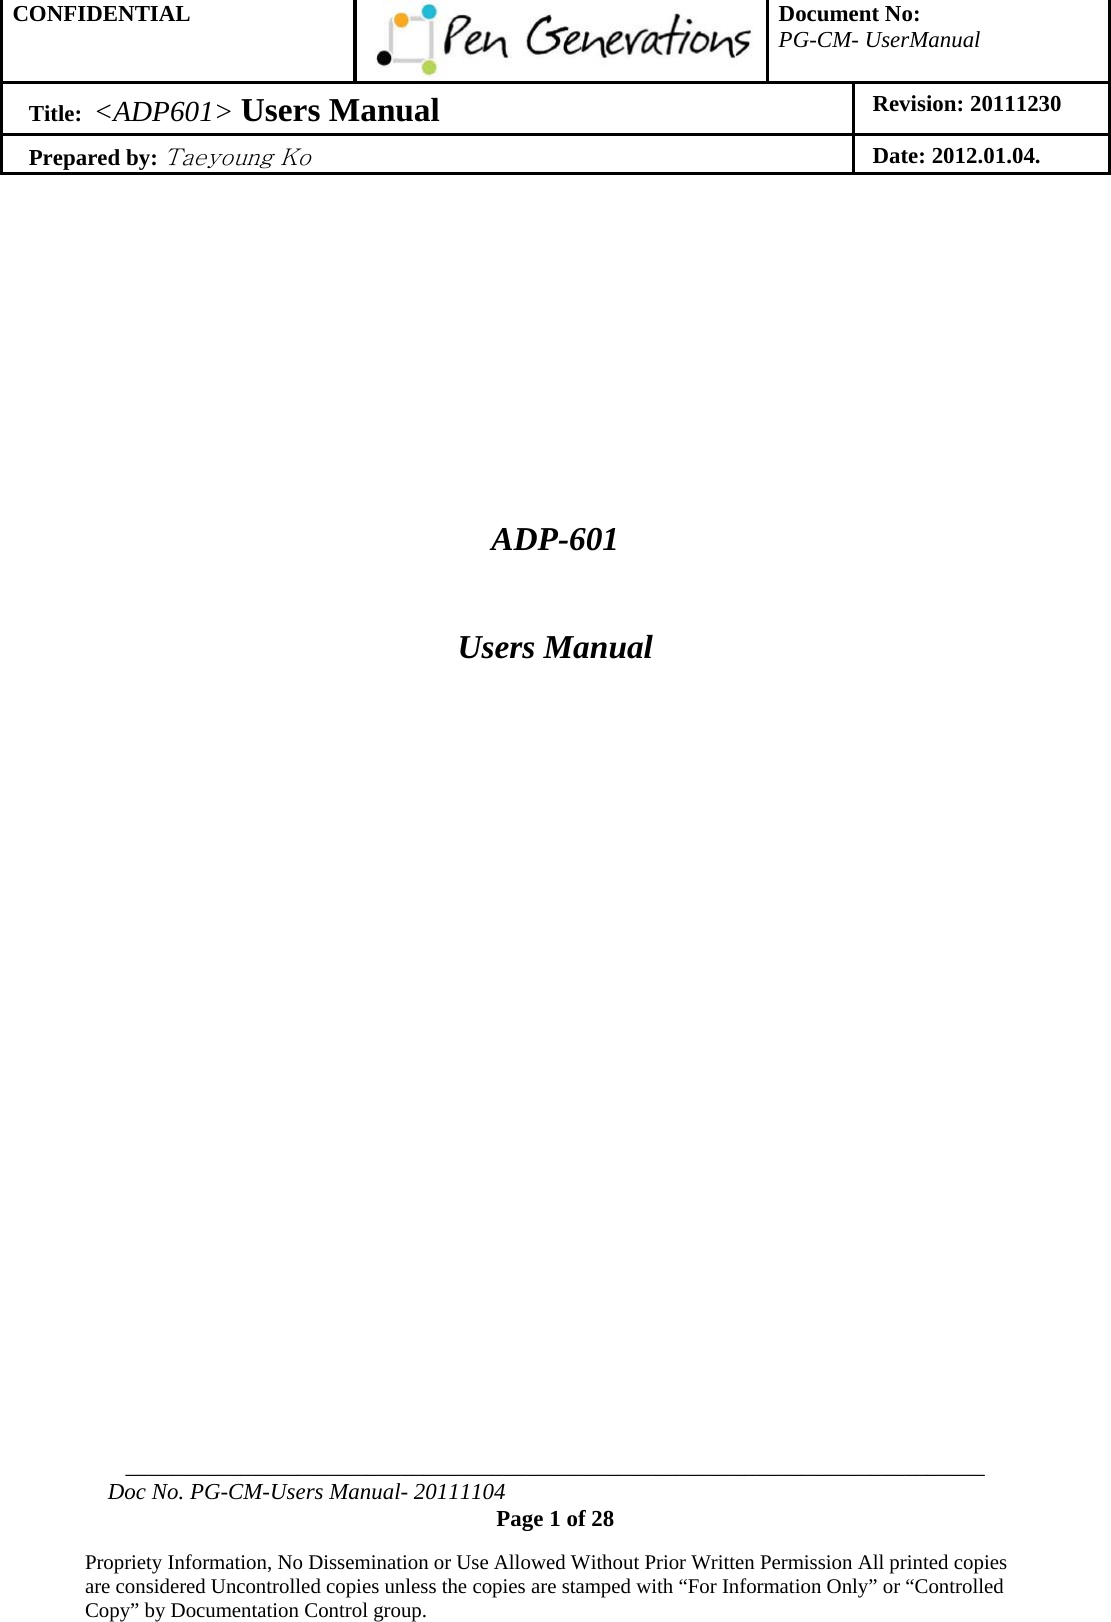 CONFIDENTIAL  Document No: PG-CM- UserManual Title:  &lt;ADP601&gt; Users Manual   Revision: 20111230 Prepared by: Taeyoung Ko Date: 2012.01.04.  ___________________________________________________________________________ Doc No. PG-CM-Users Manual- 20111104 Page 1 of 28  Propriety Information, No Dissemination or Use Allowed Without Prior Written Permission All printed copies are considered Uncontrolled copies unless the copies are stamped with “For Information Only” or “Controlled Copy” by Documentation Control group.       ADP-601  Users Manual     